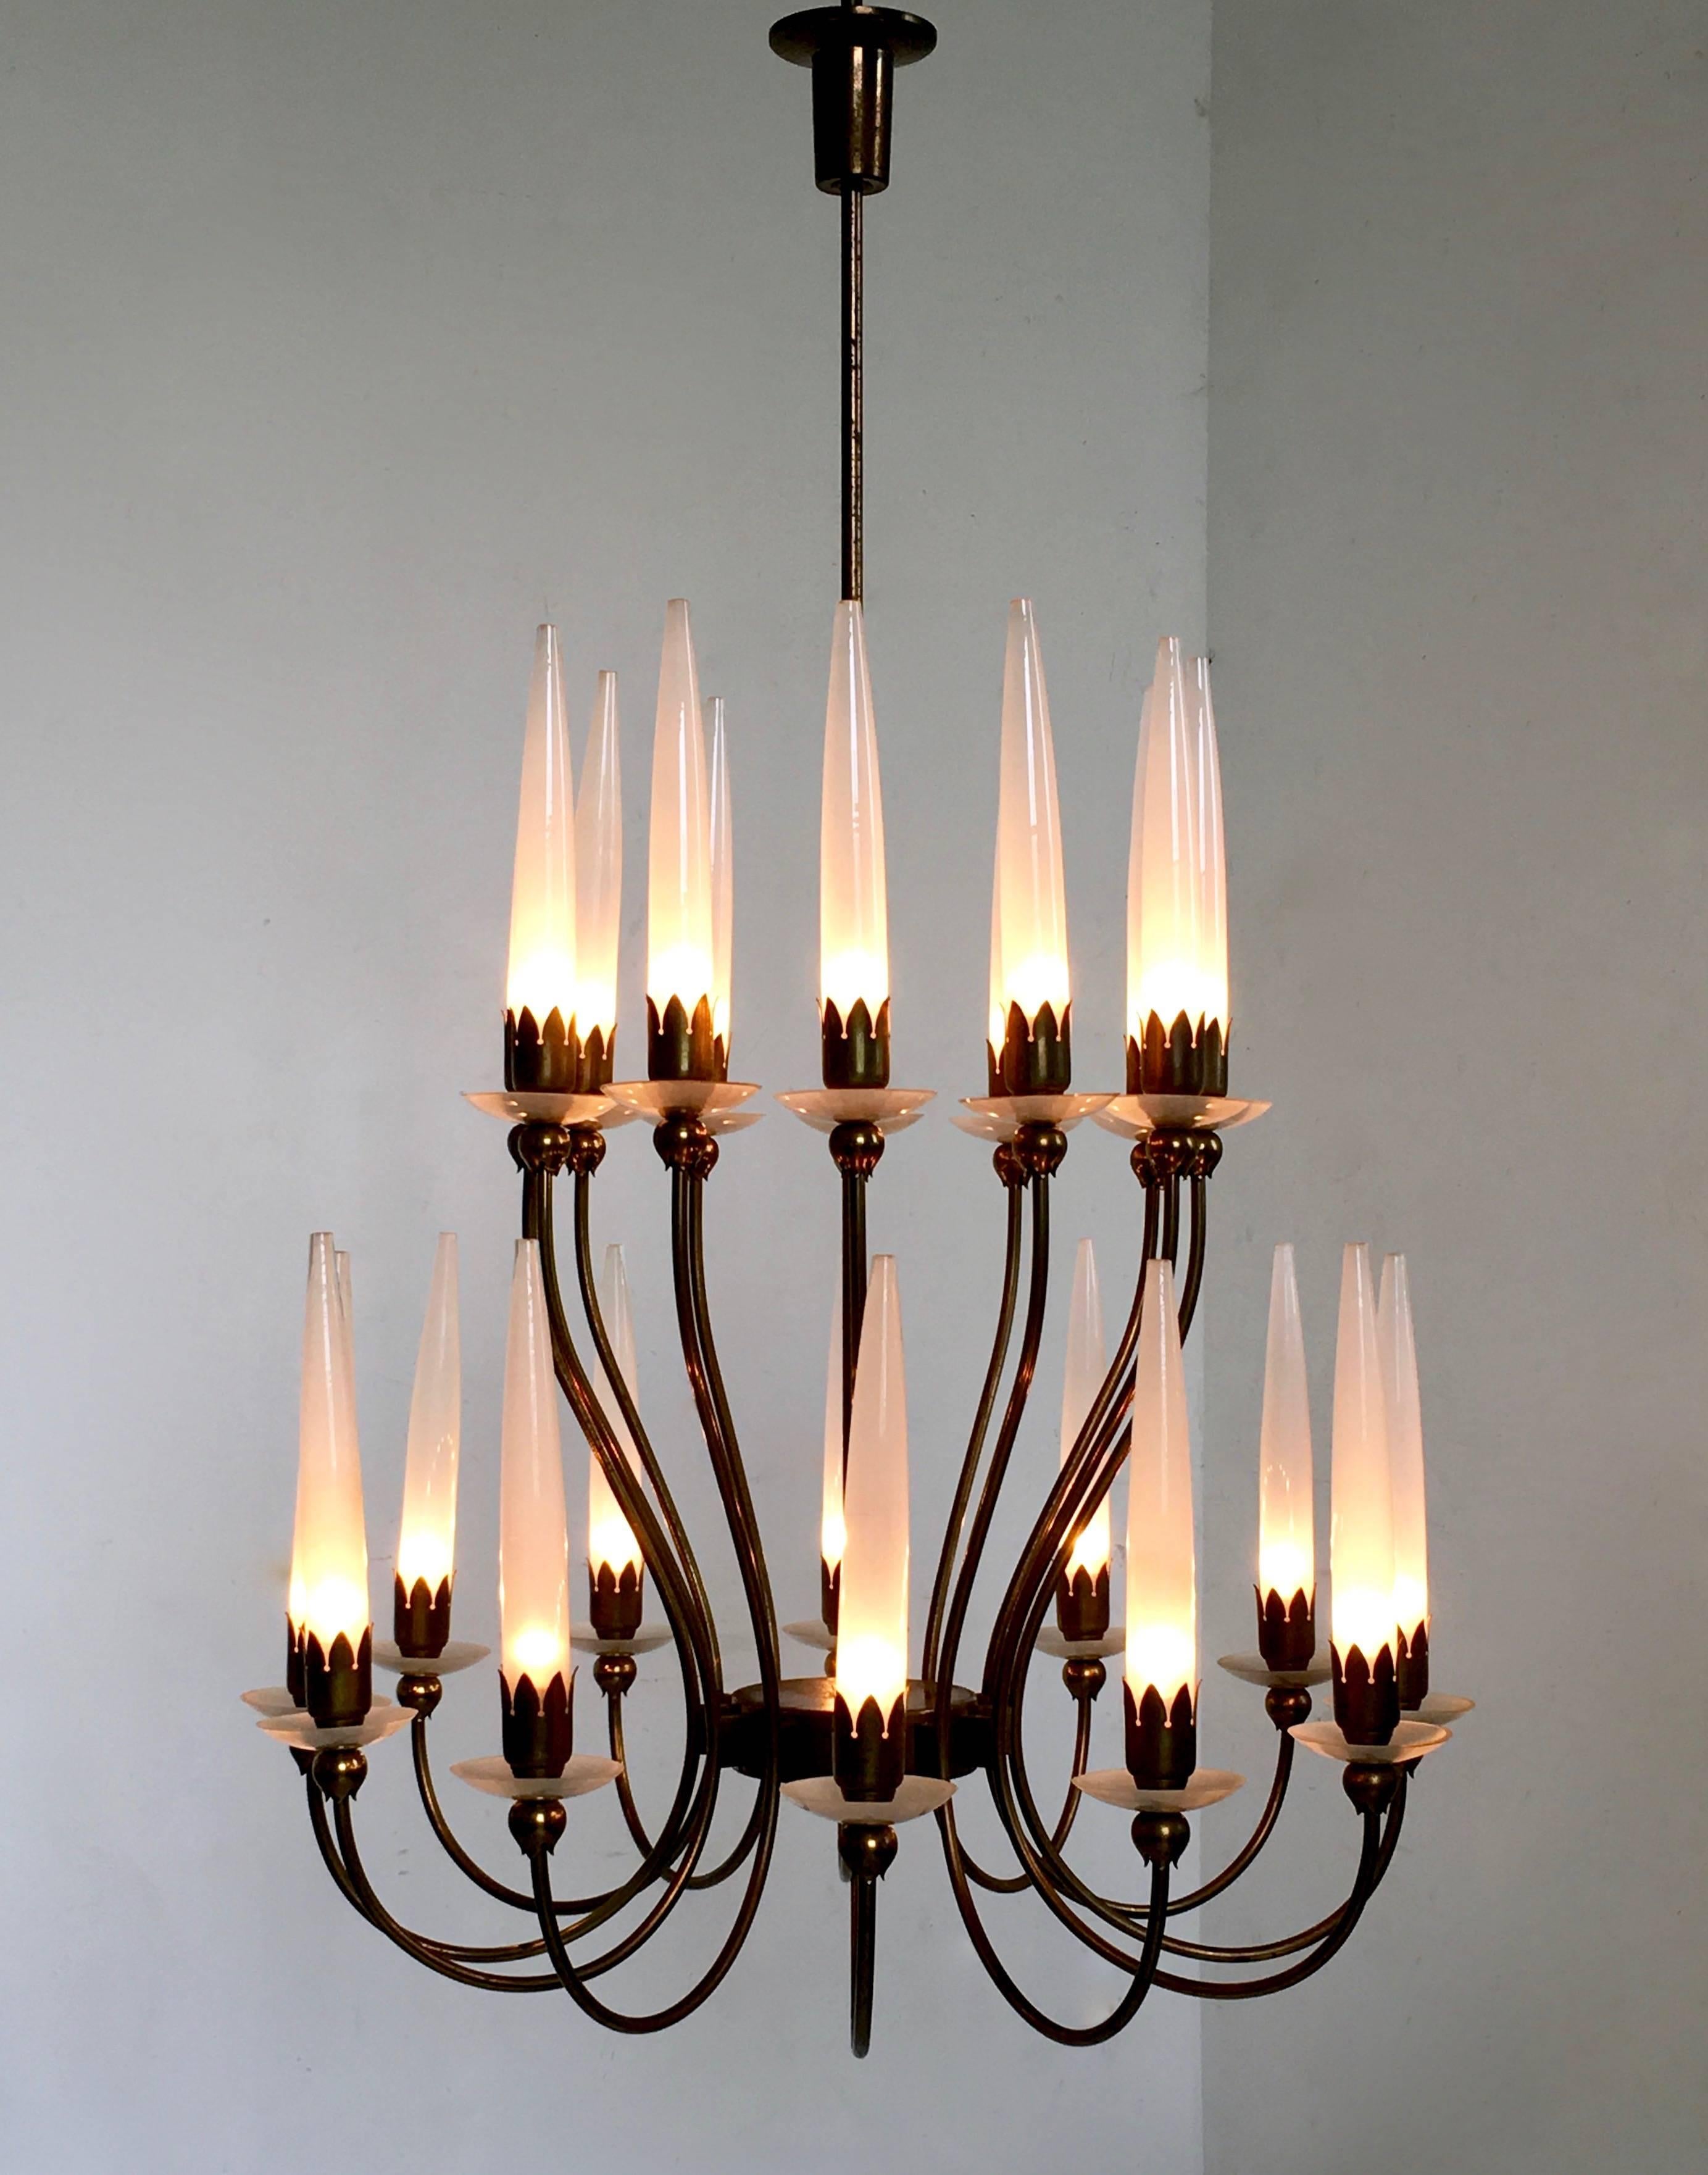 Frosted Rare 24-Light Chandelier Mod. 12423 by Angelo Lelli for Arredoluce, Italy, 1953